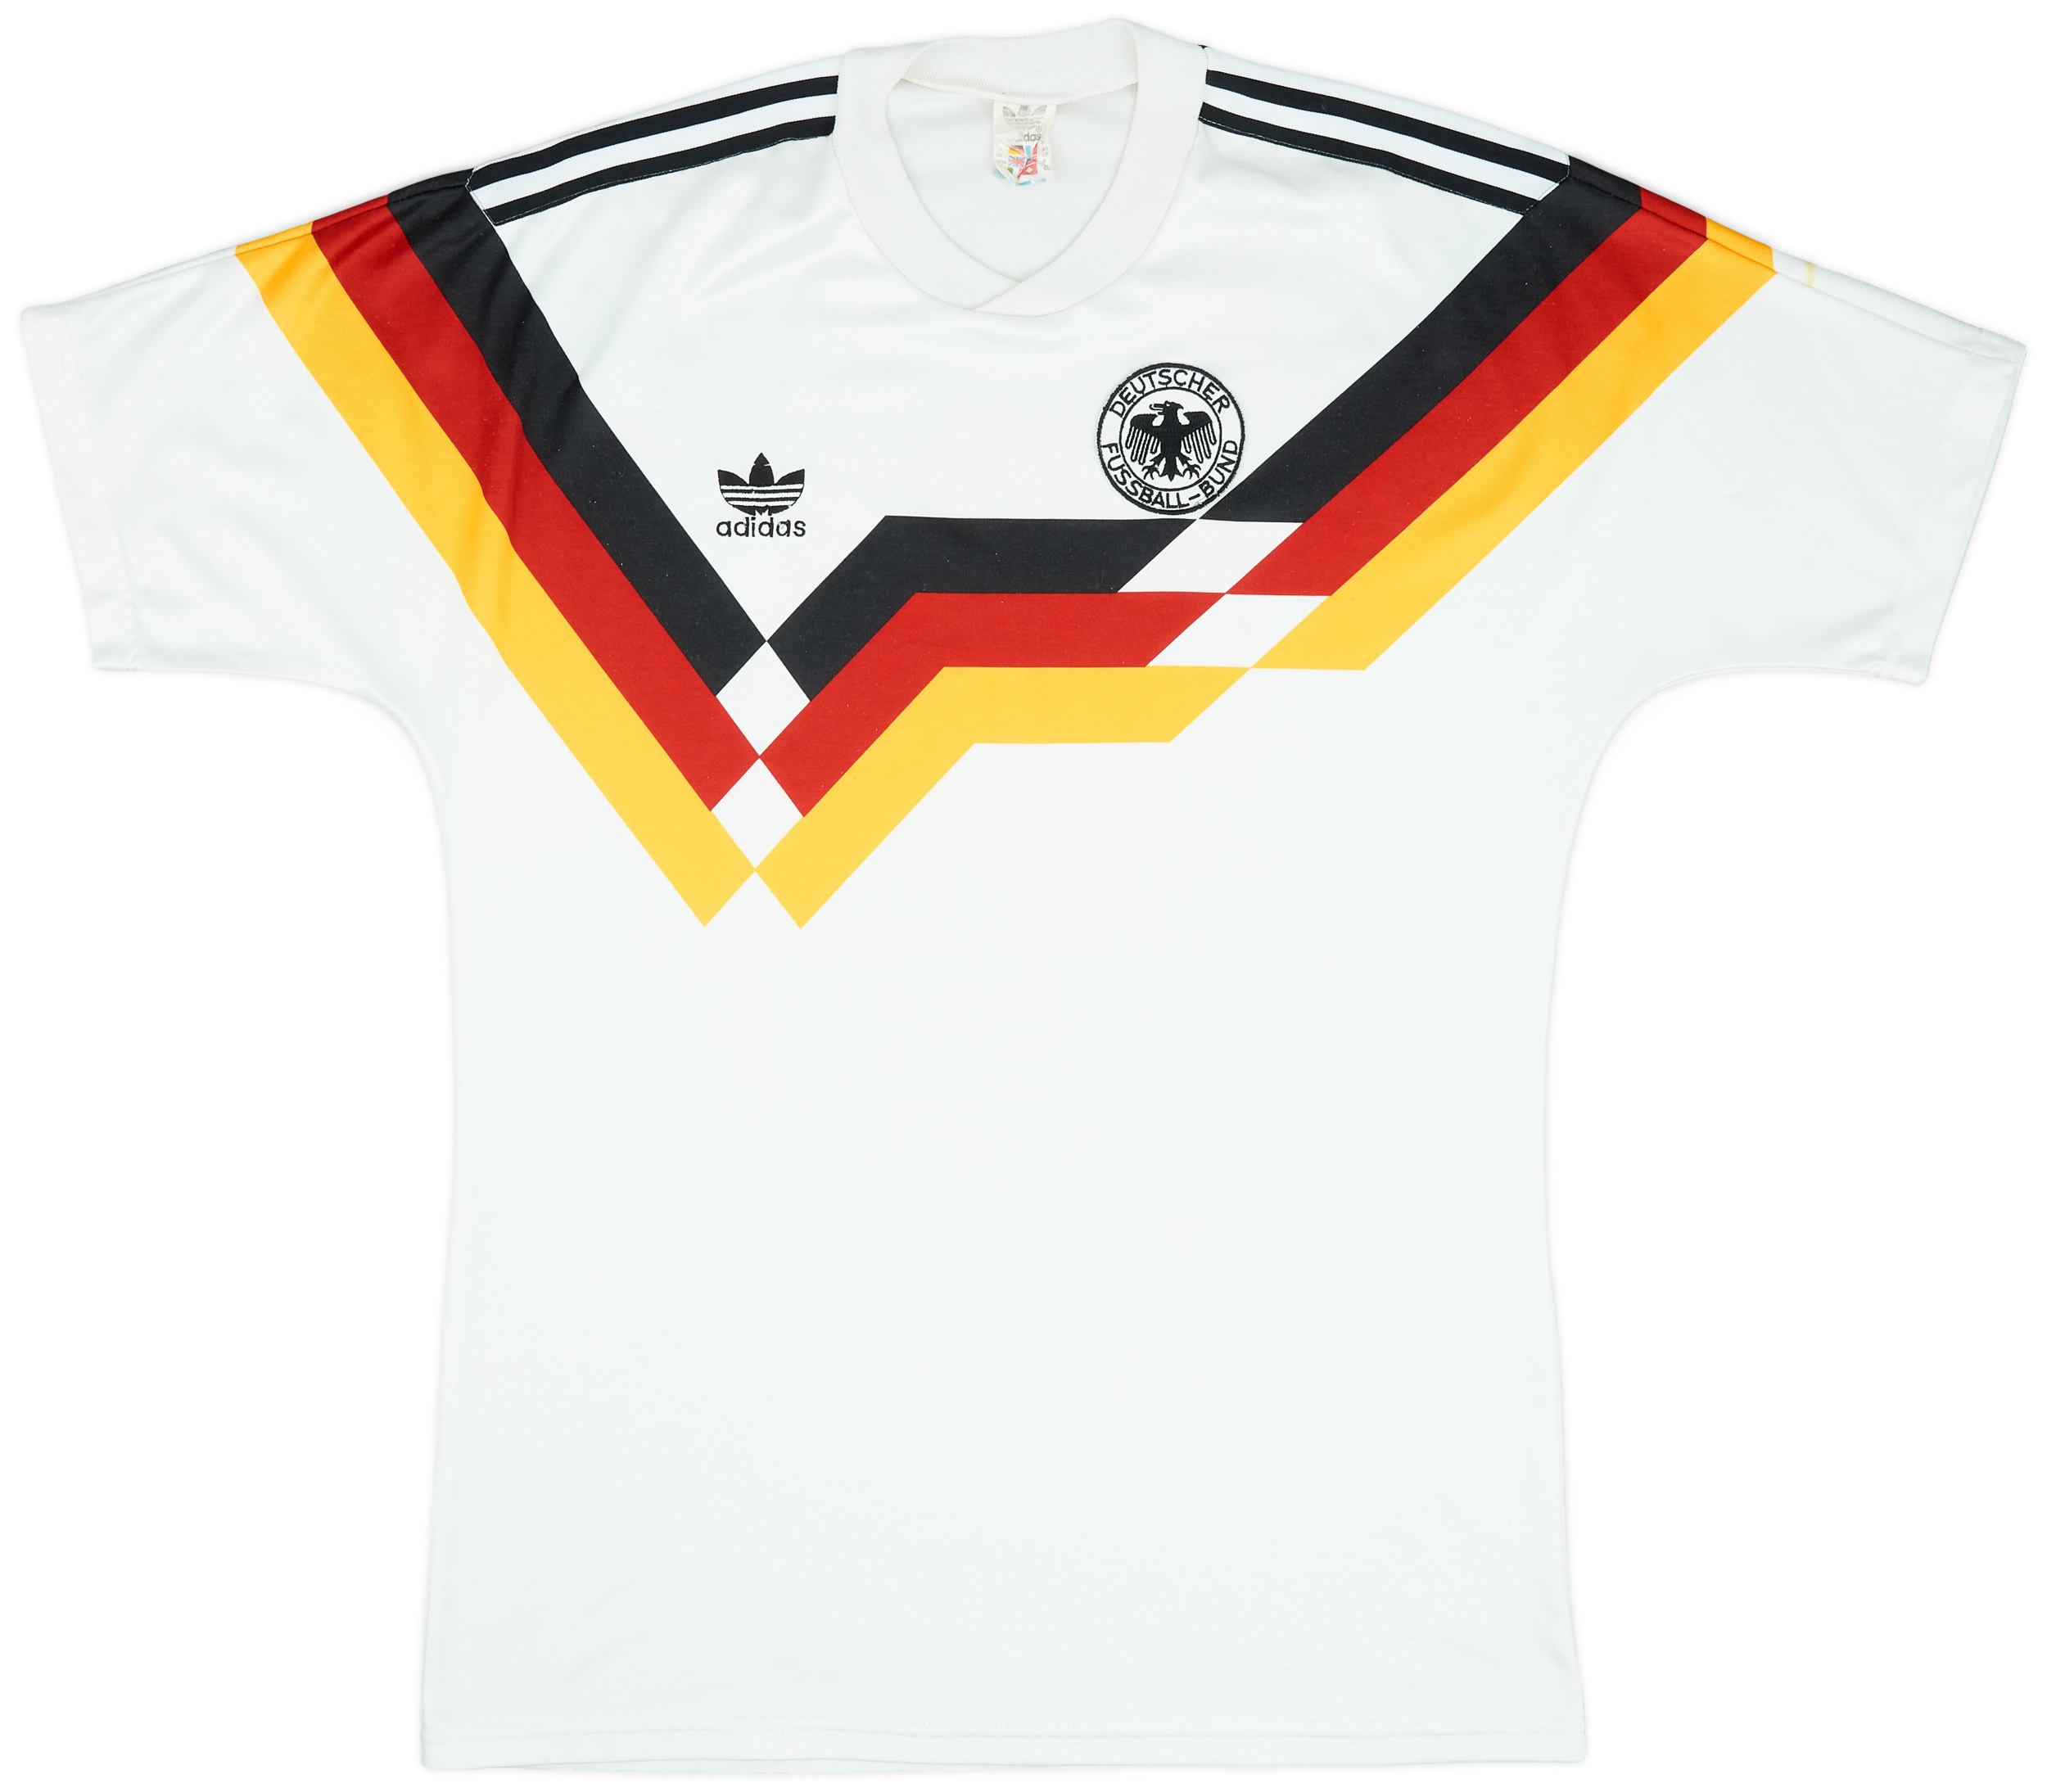 1988-91 West Germany Home Shirt - 8/10 - (/)